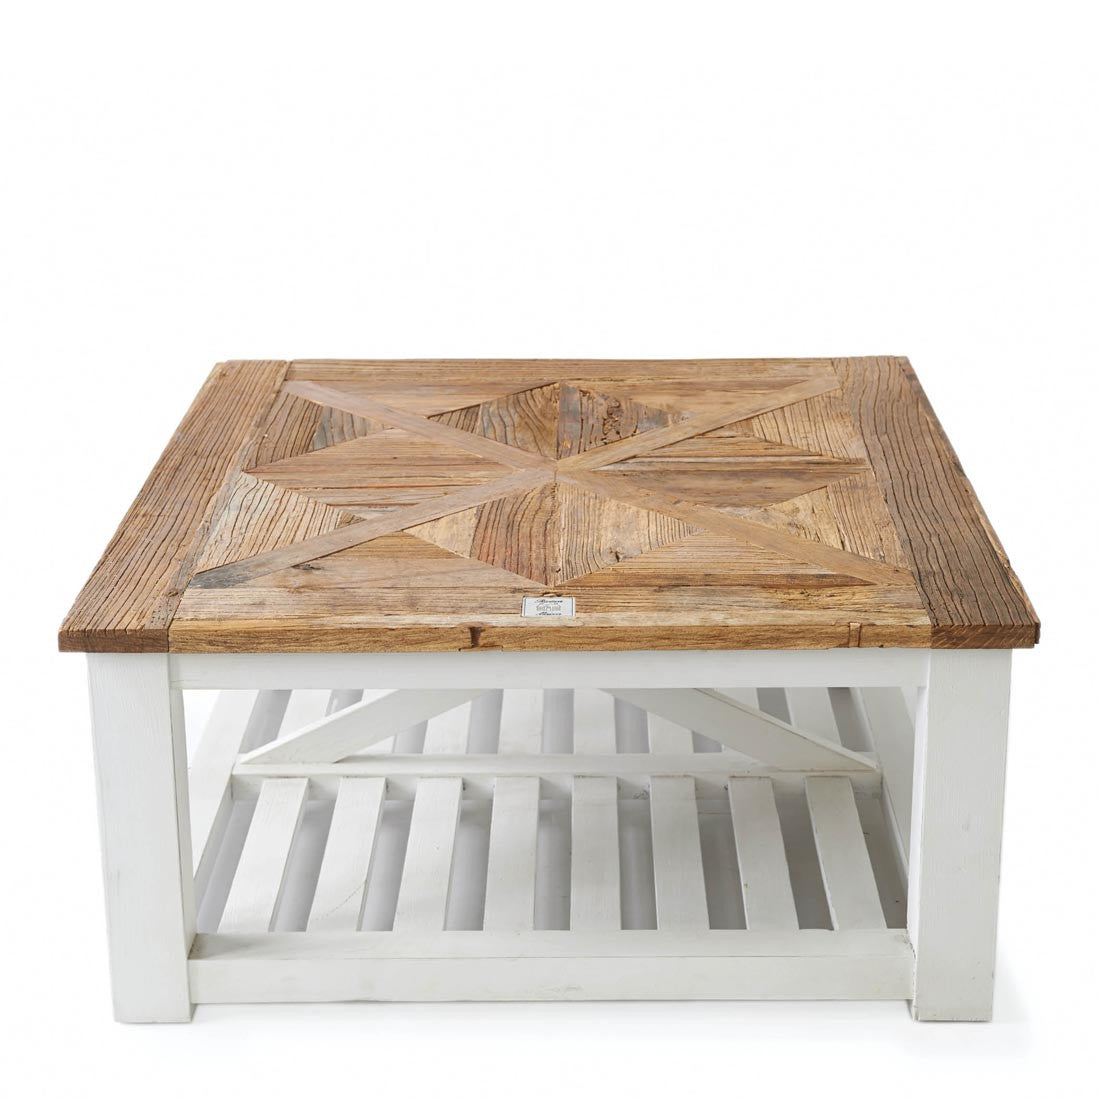 Château Chassigny Coffee Table, 90cm x 90cm